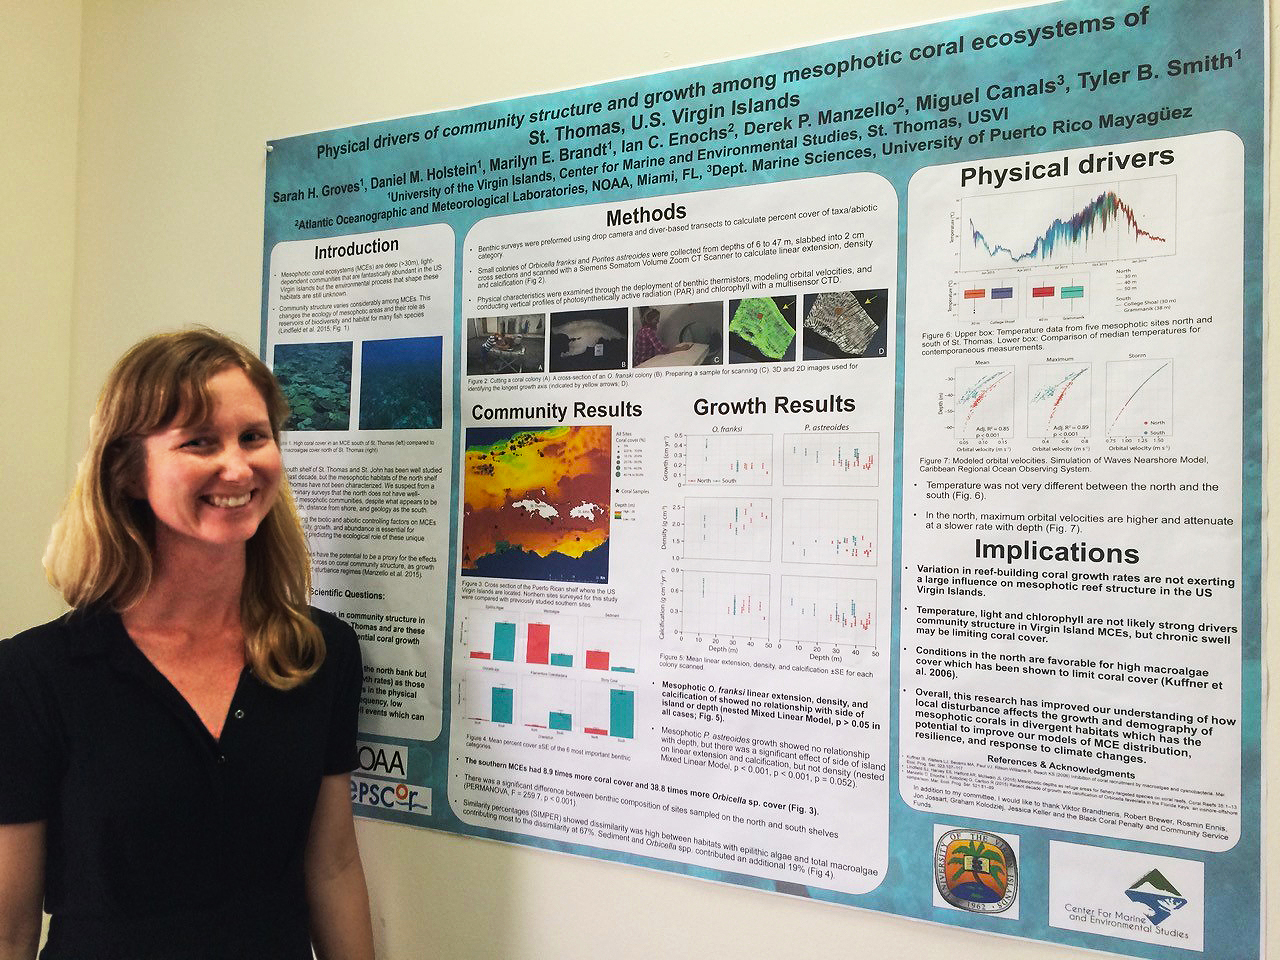 Sarah Groves -- Physical Drivers of Community Structure and Growth of Mesophotic Coral Ecosystems Surrounding St. Thomas, U.S. Virgin Islands